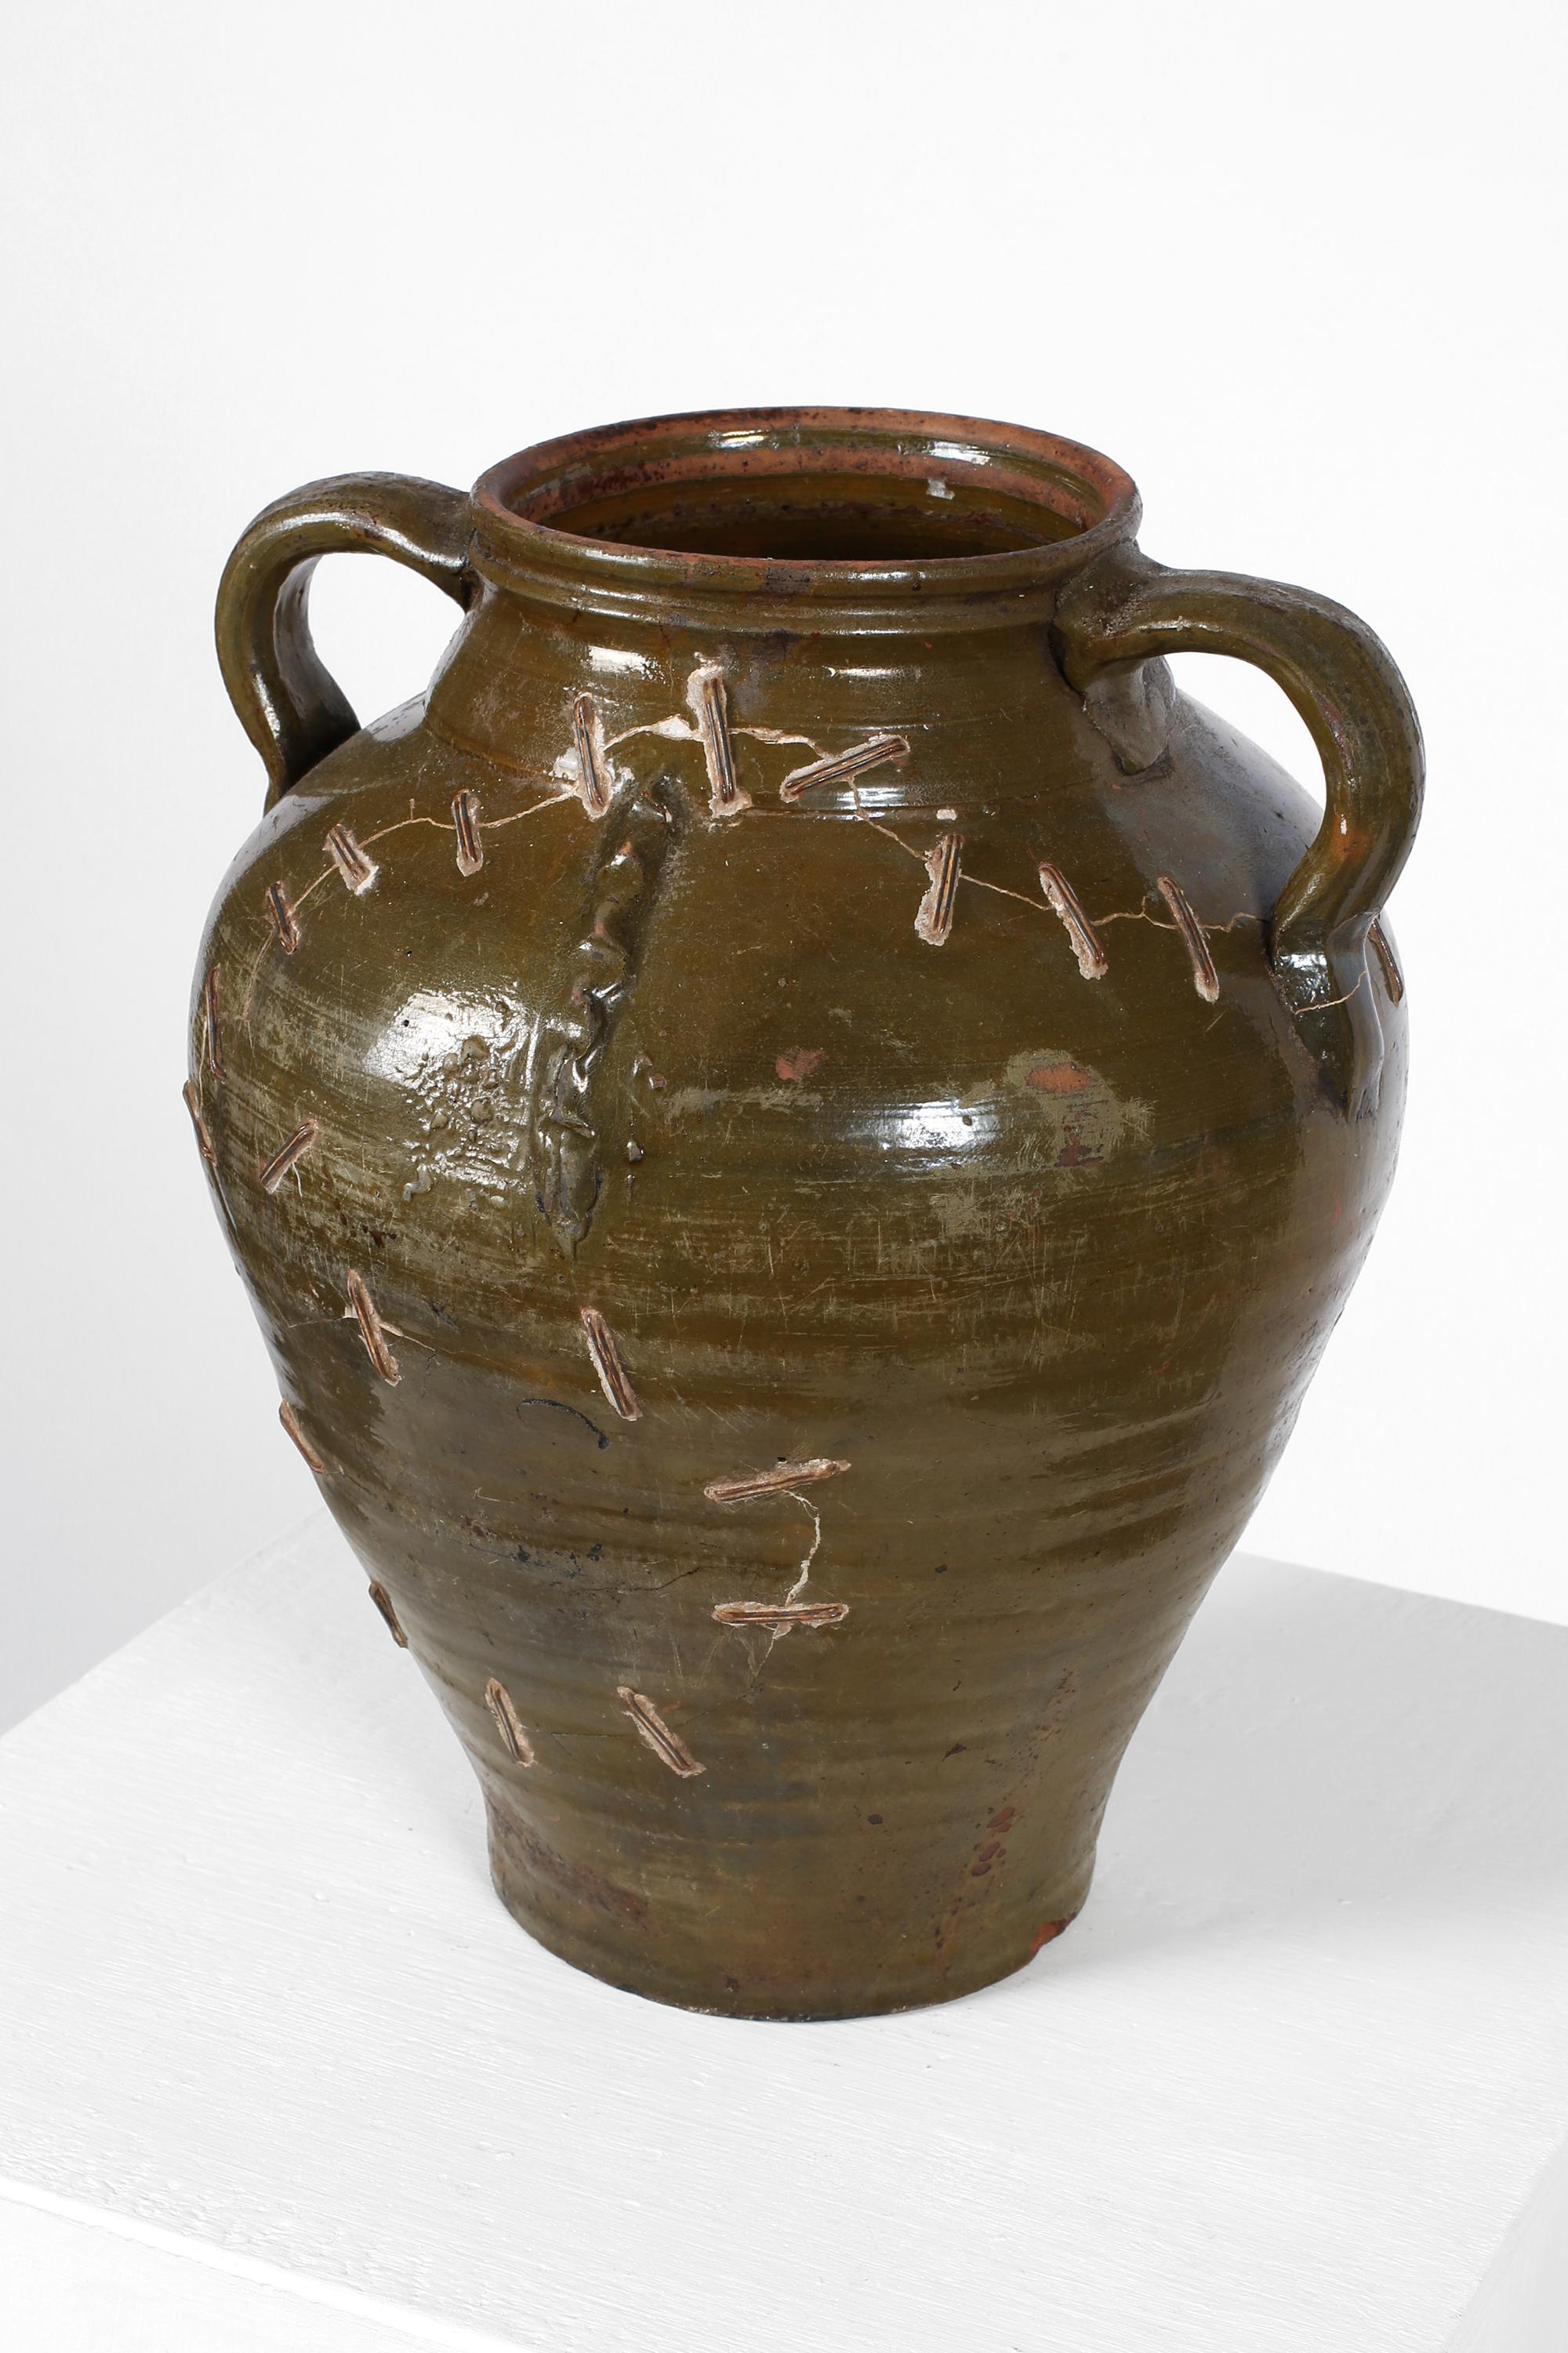 A 19th century dark olive green glazed earthenware jar from Andalusia with twin handles and characterful iron staple repairs. Spanish, c. 1850.